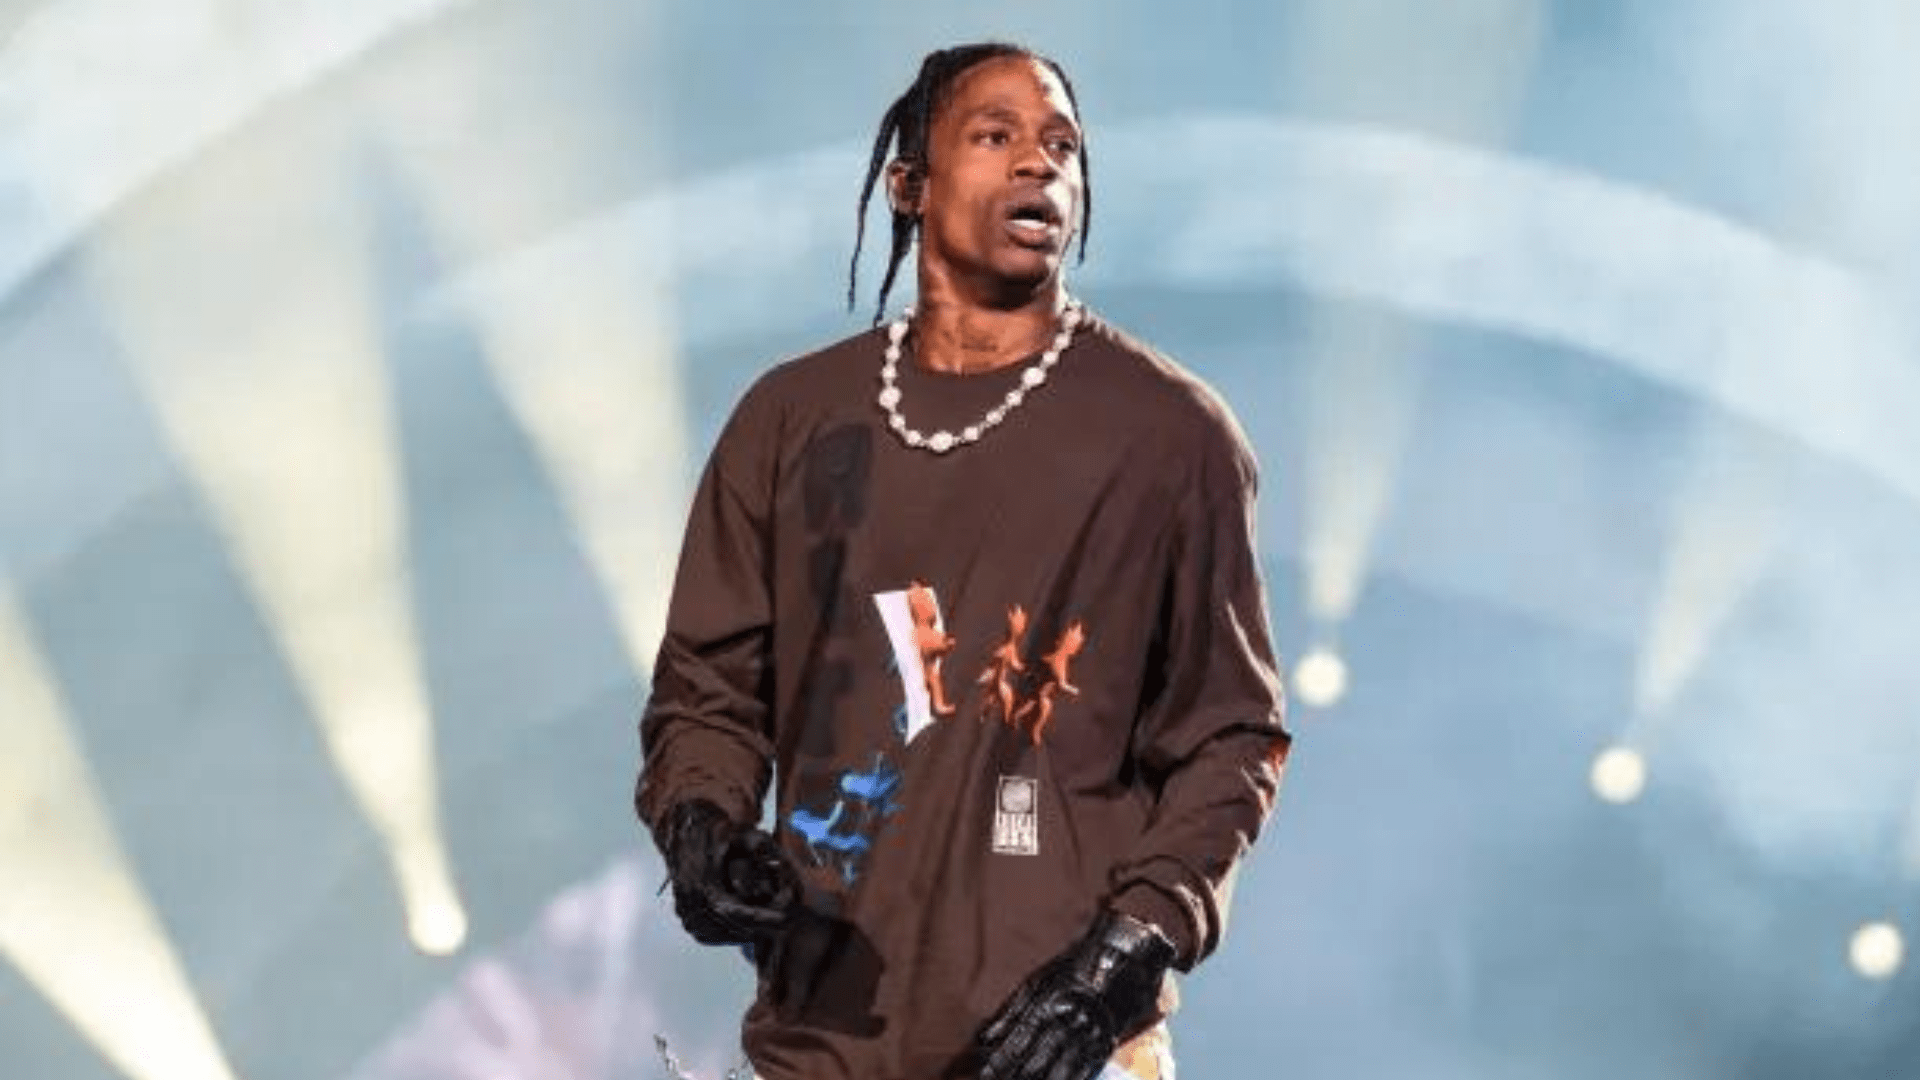 Travis Scott ticket updates as Circus Maximus London show SELLS OUT in minutes